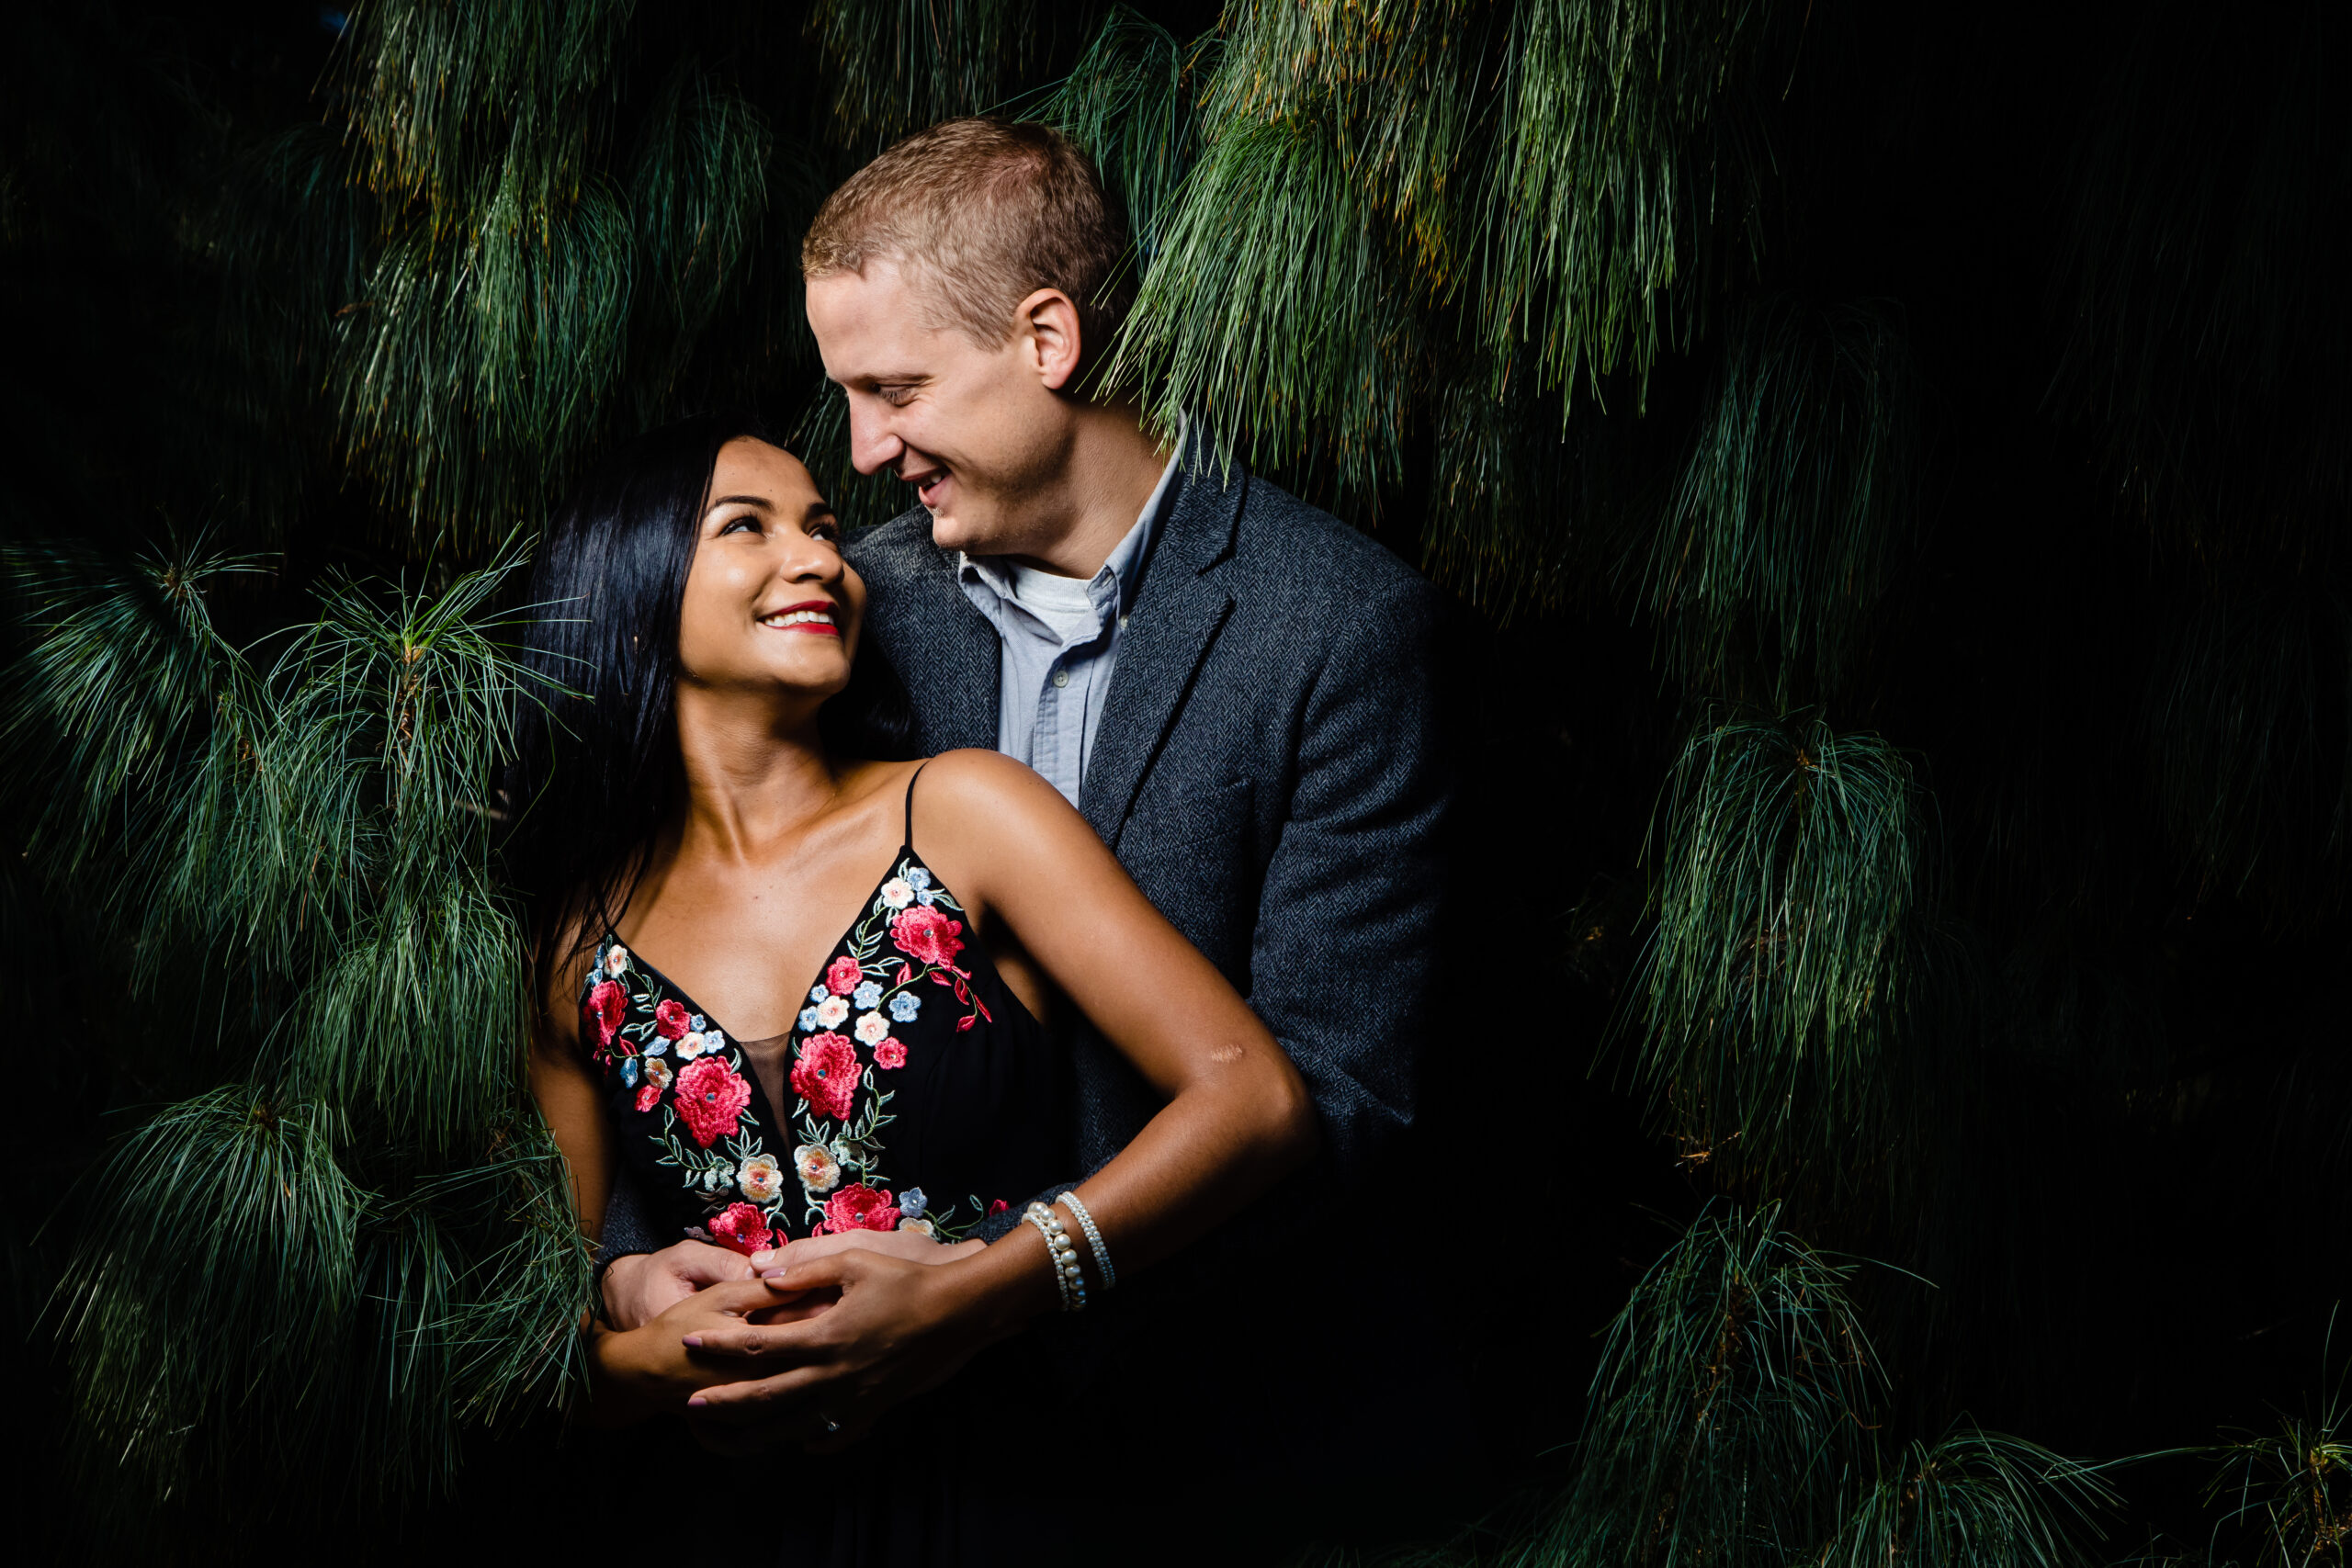 An engaged couple, captured by New Jersey Wedding Photographer Jarot Bocanegra, embracing in front of pine trees.